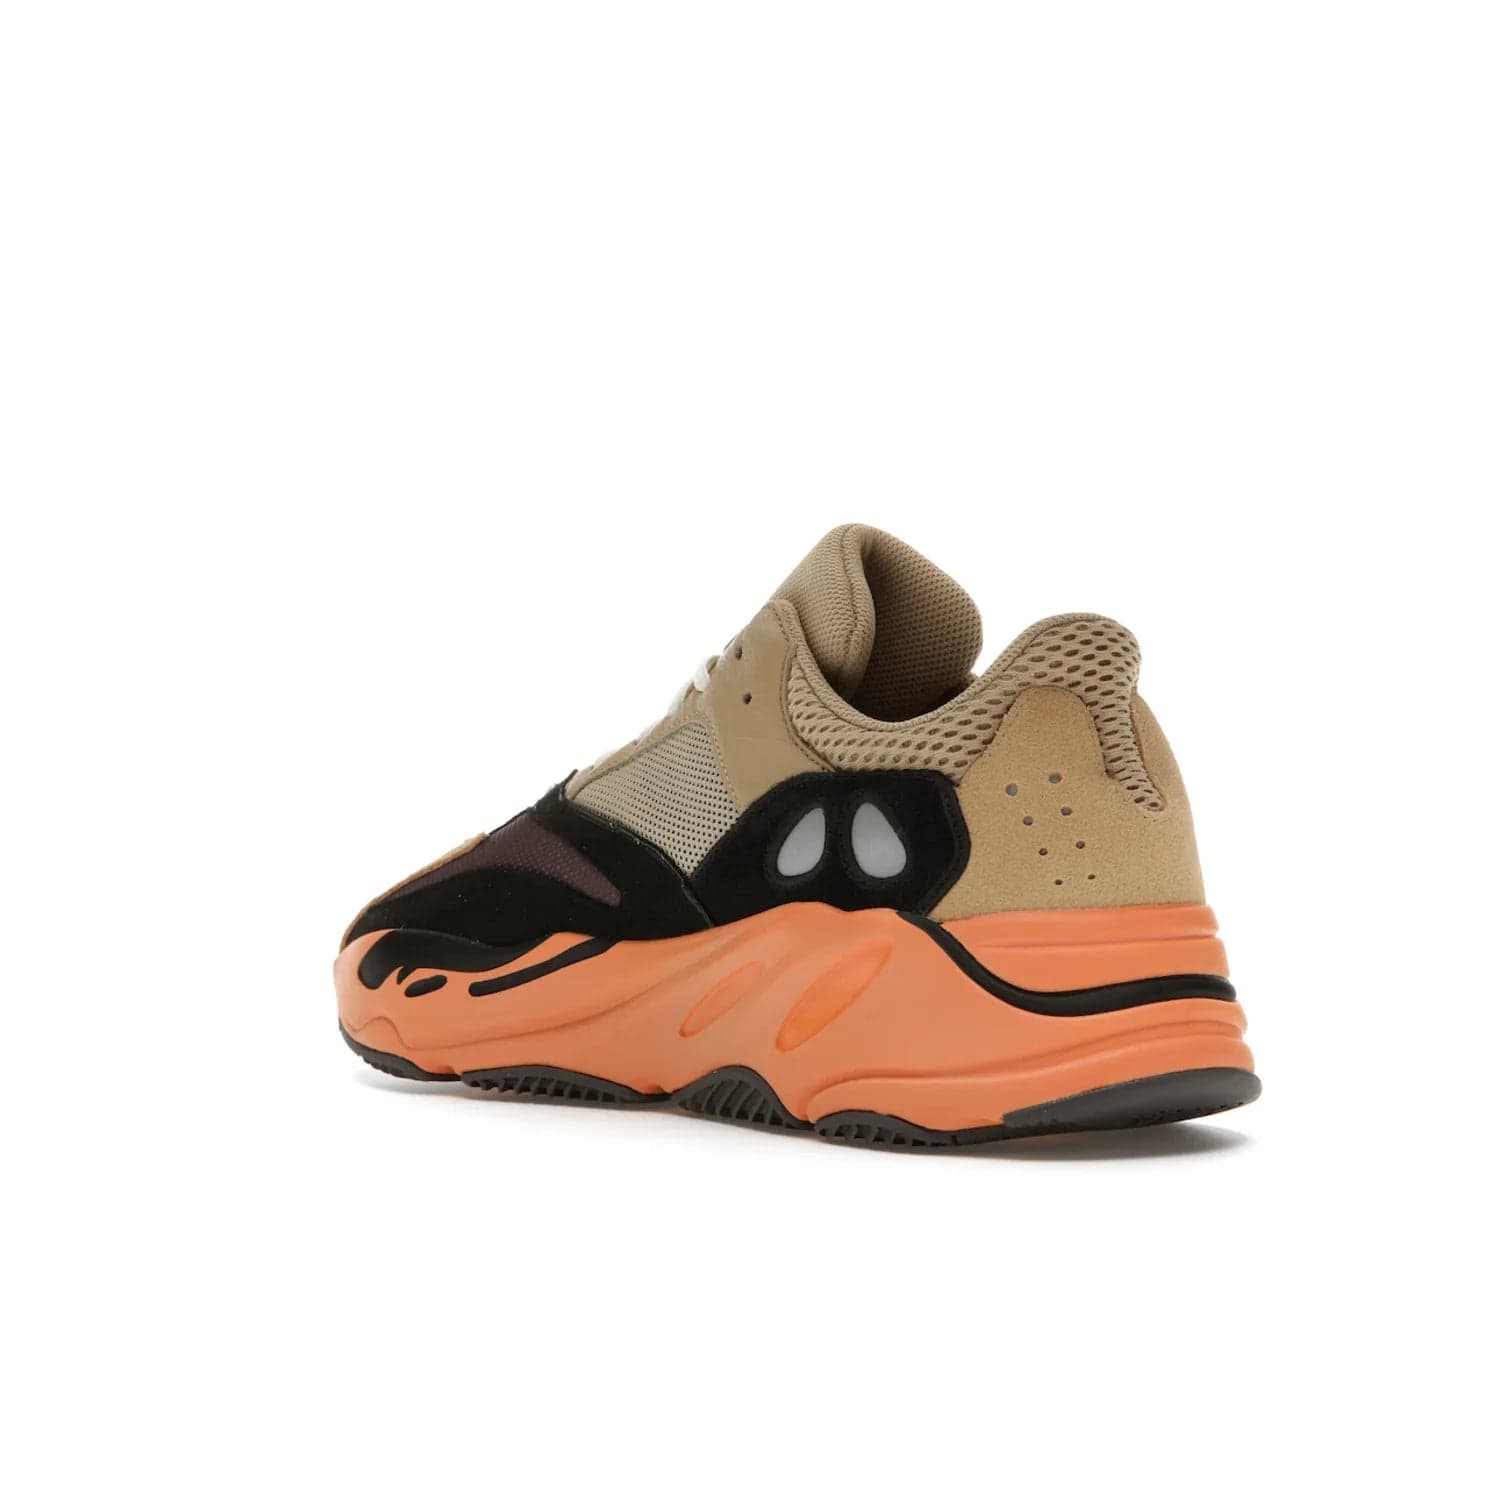 adidas Yeezy Boost 700 Enflame Amber - Image 24 - Only at www.BallersClubKickz.com - Adidas Yeezy Boost 700 Enflame Amber: Eye-catching design with pale yellow, brown, teal, and orange! Get yours in June 2021.